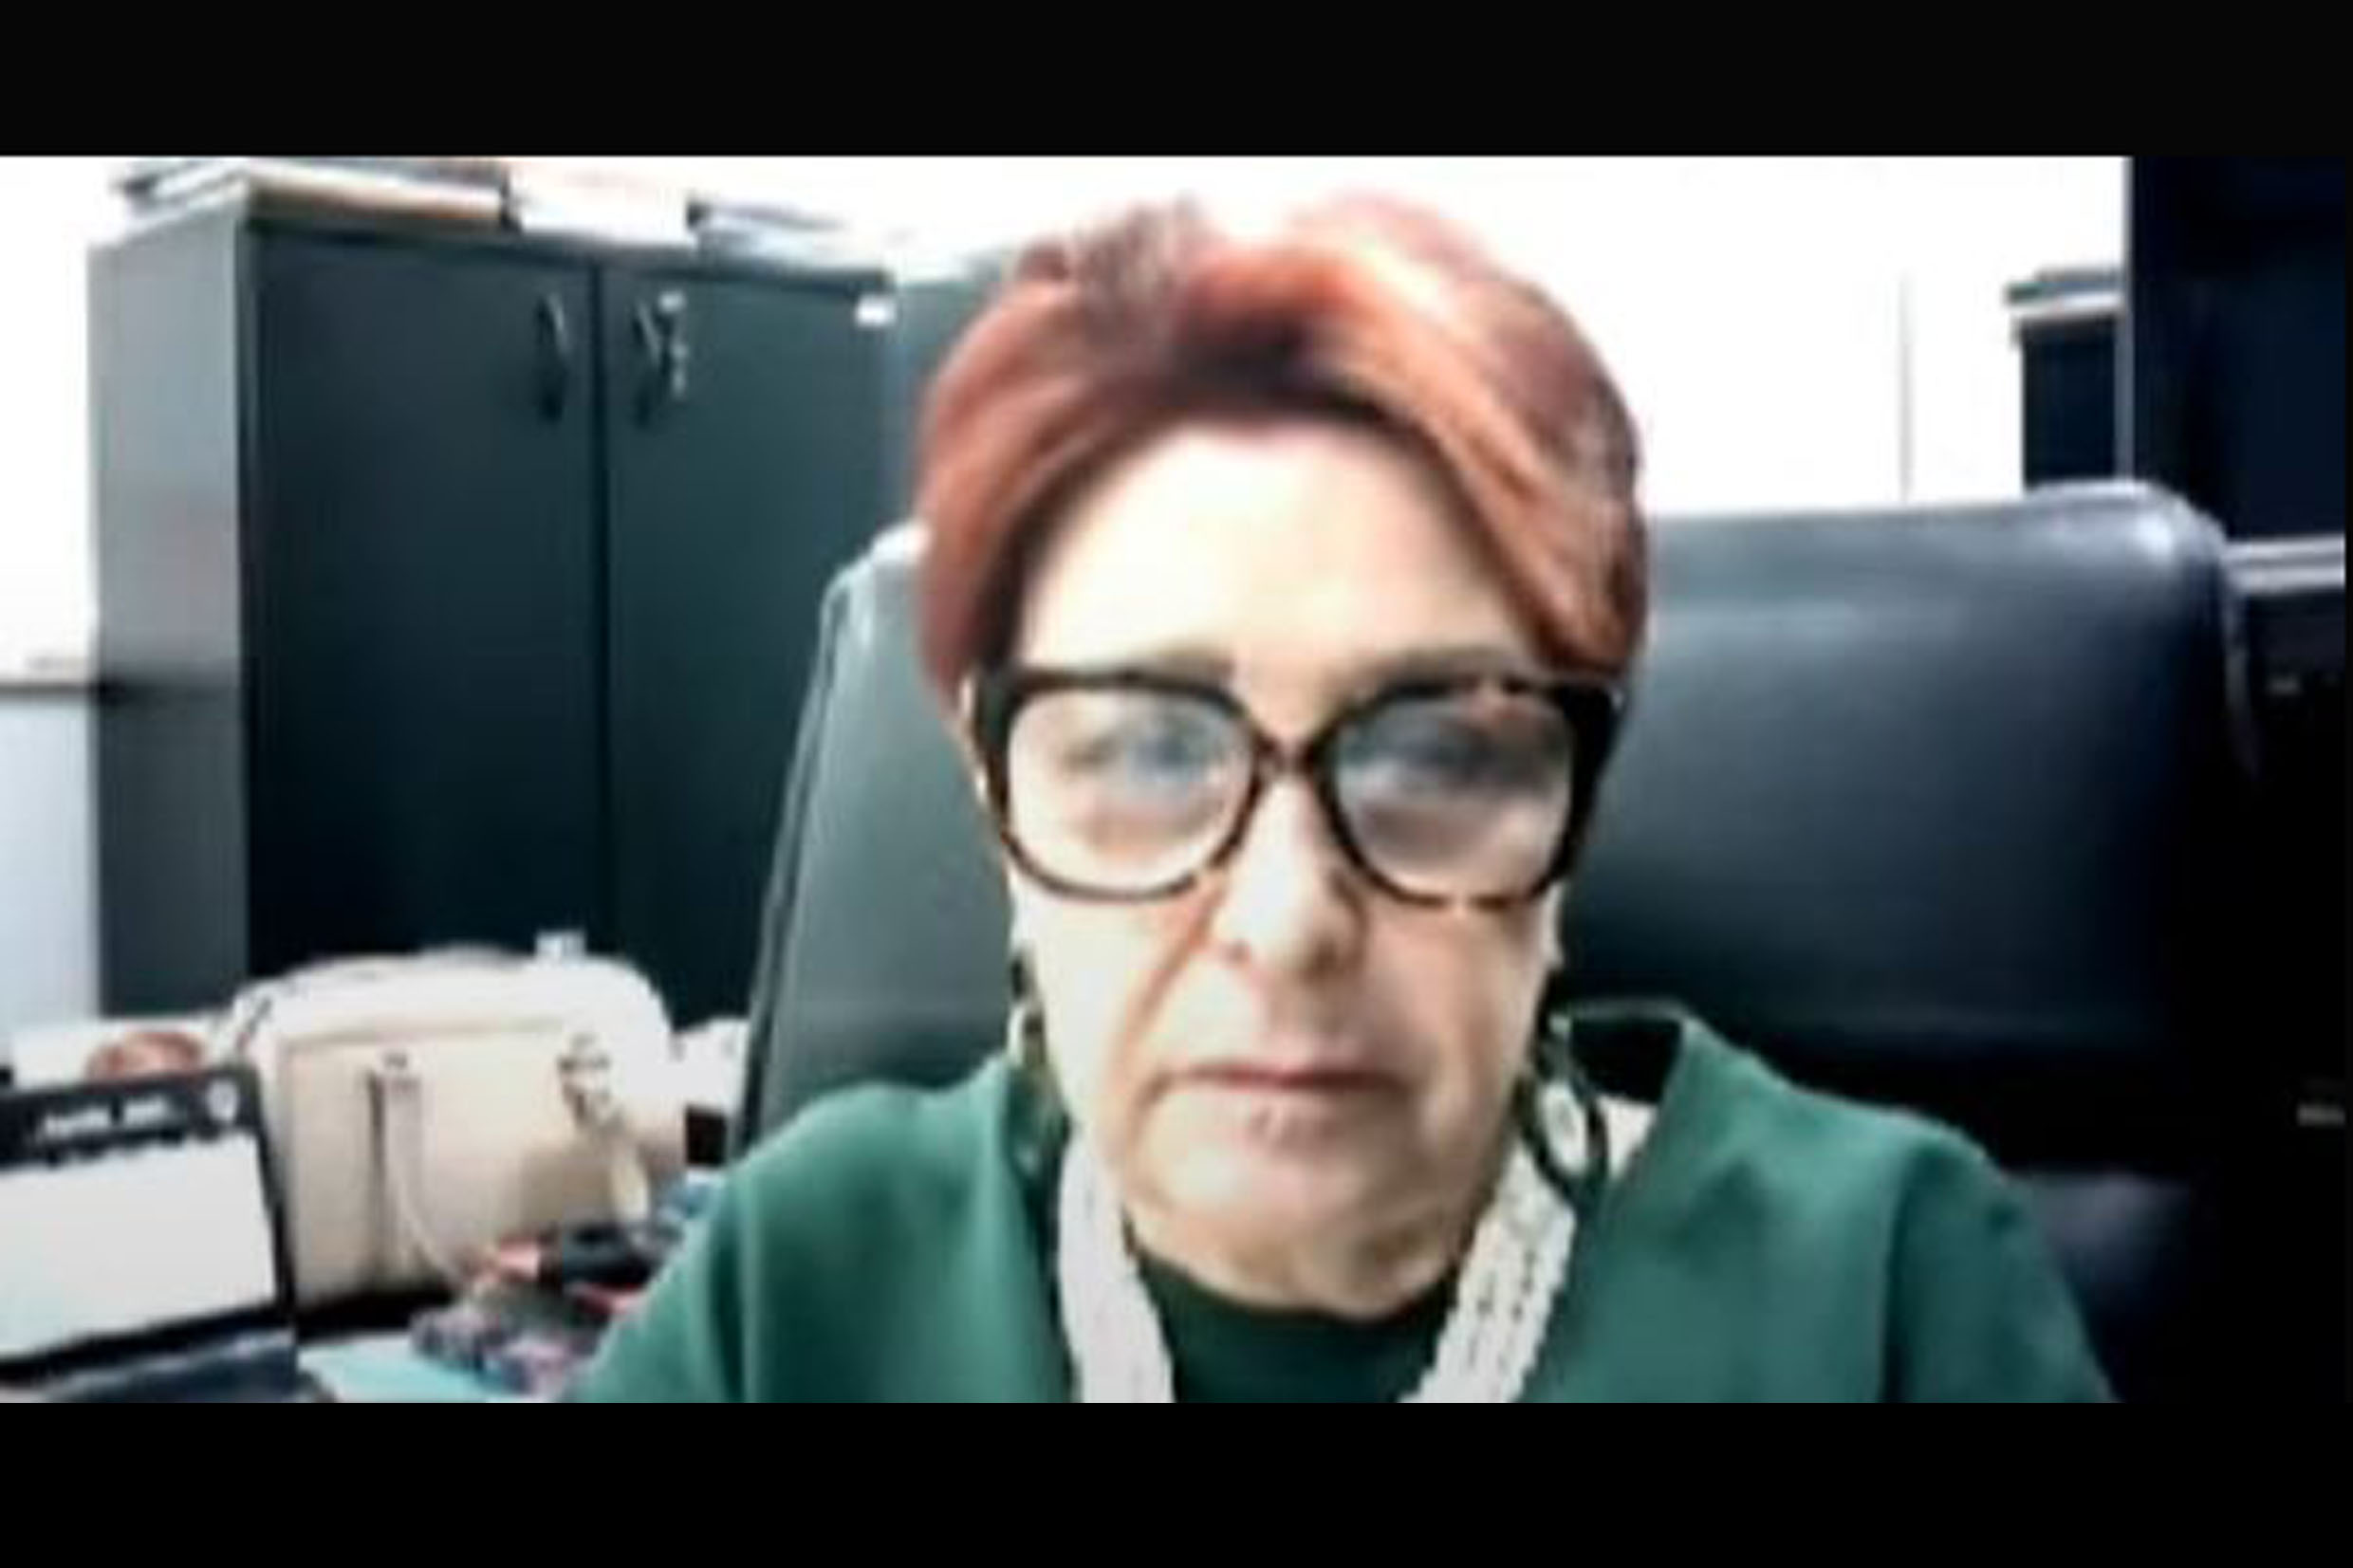 Edna Macedo<a style='float:right' href='https://www3.al.sp.gov.br/repositorio/noticia/N-08-2021/fg272706.jpg' target=_blank><img src='/_img/material-file-download-white.png' width='14px' alt='Clique para baixar a imagem'></a>